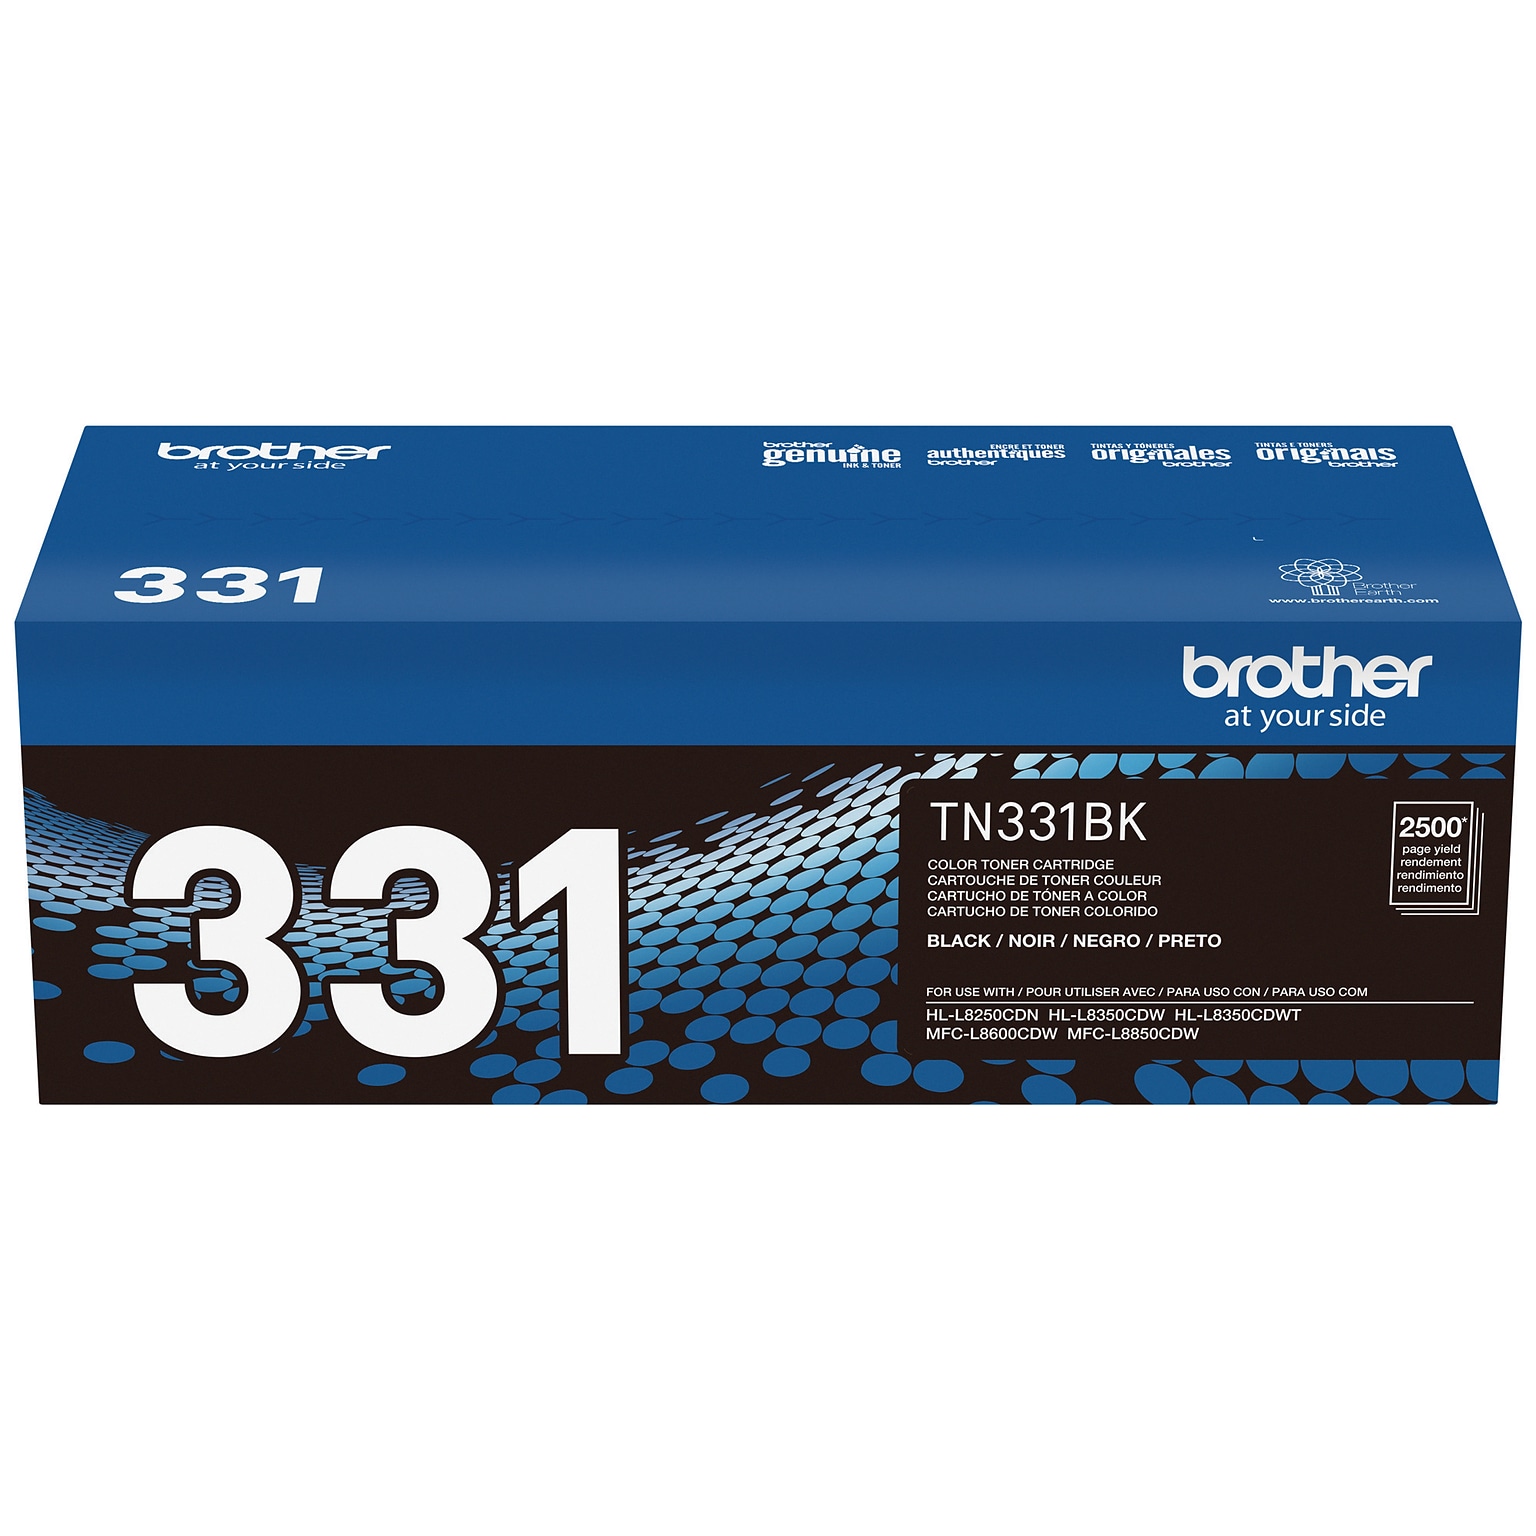 Brother TN-331 Black Standard Yield Toner Cartridge, Print Up to 2,500 Pages (TN331BK)